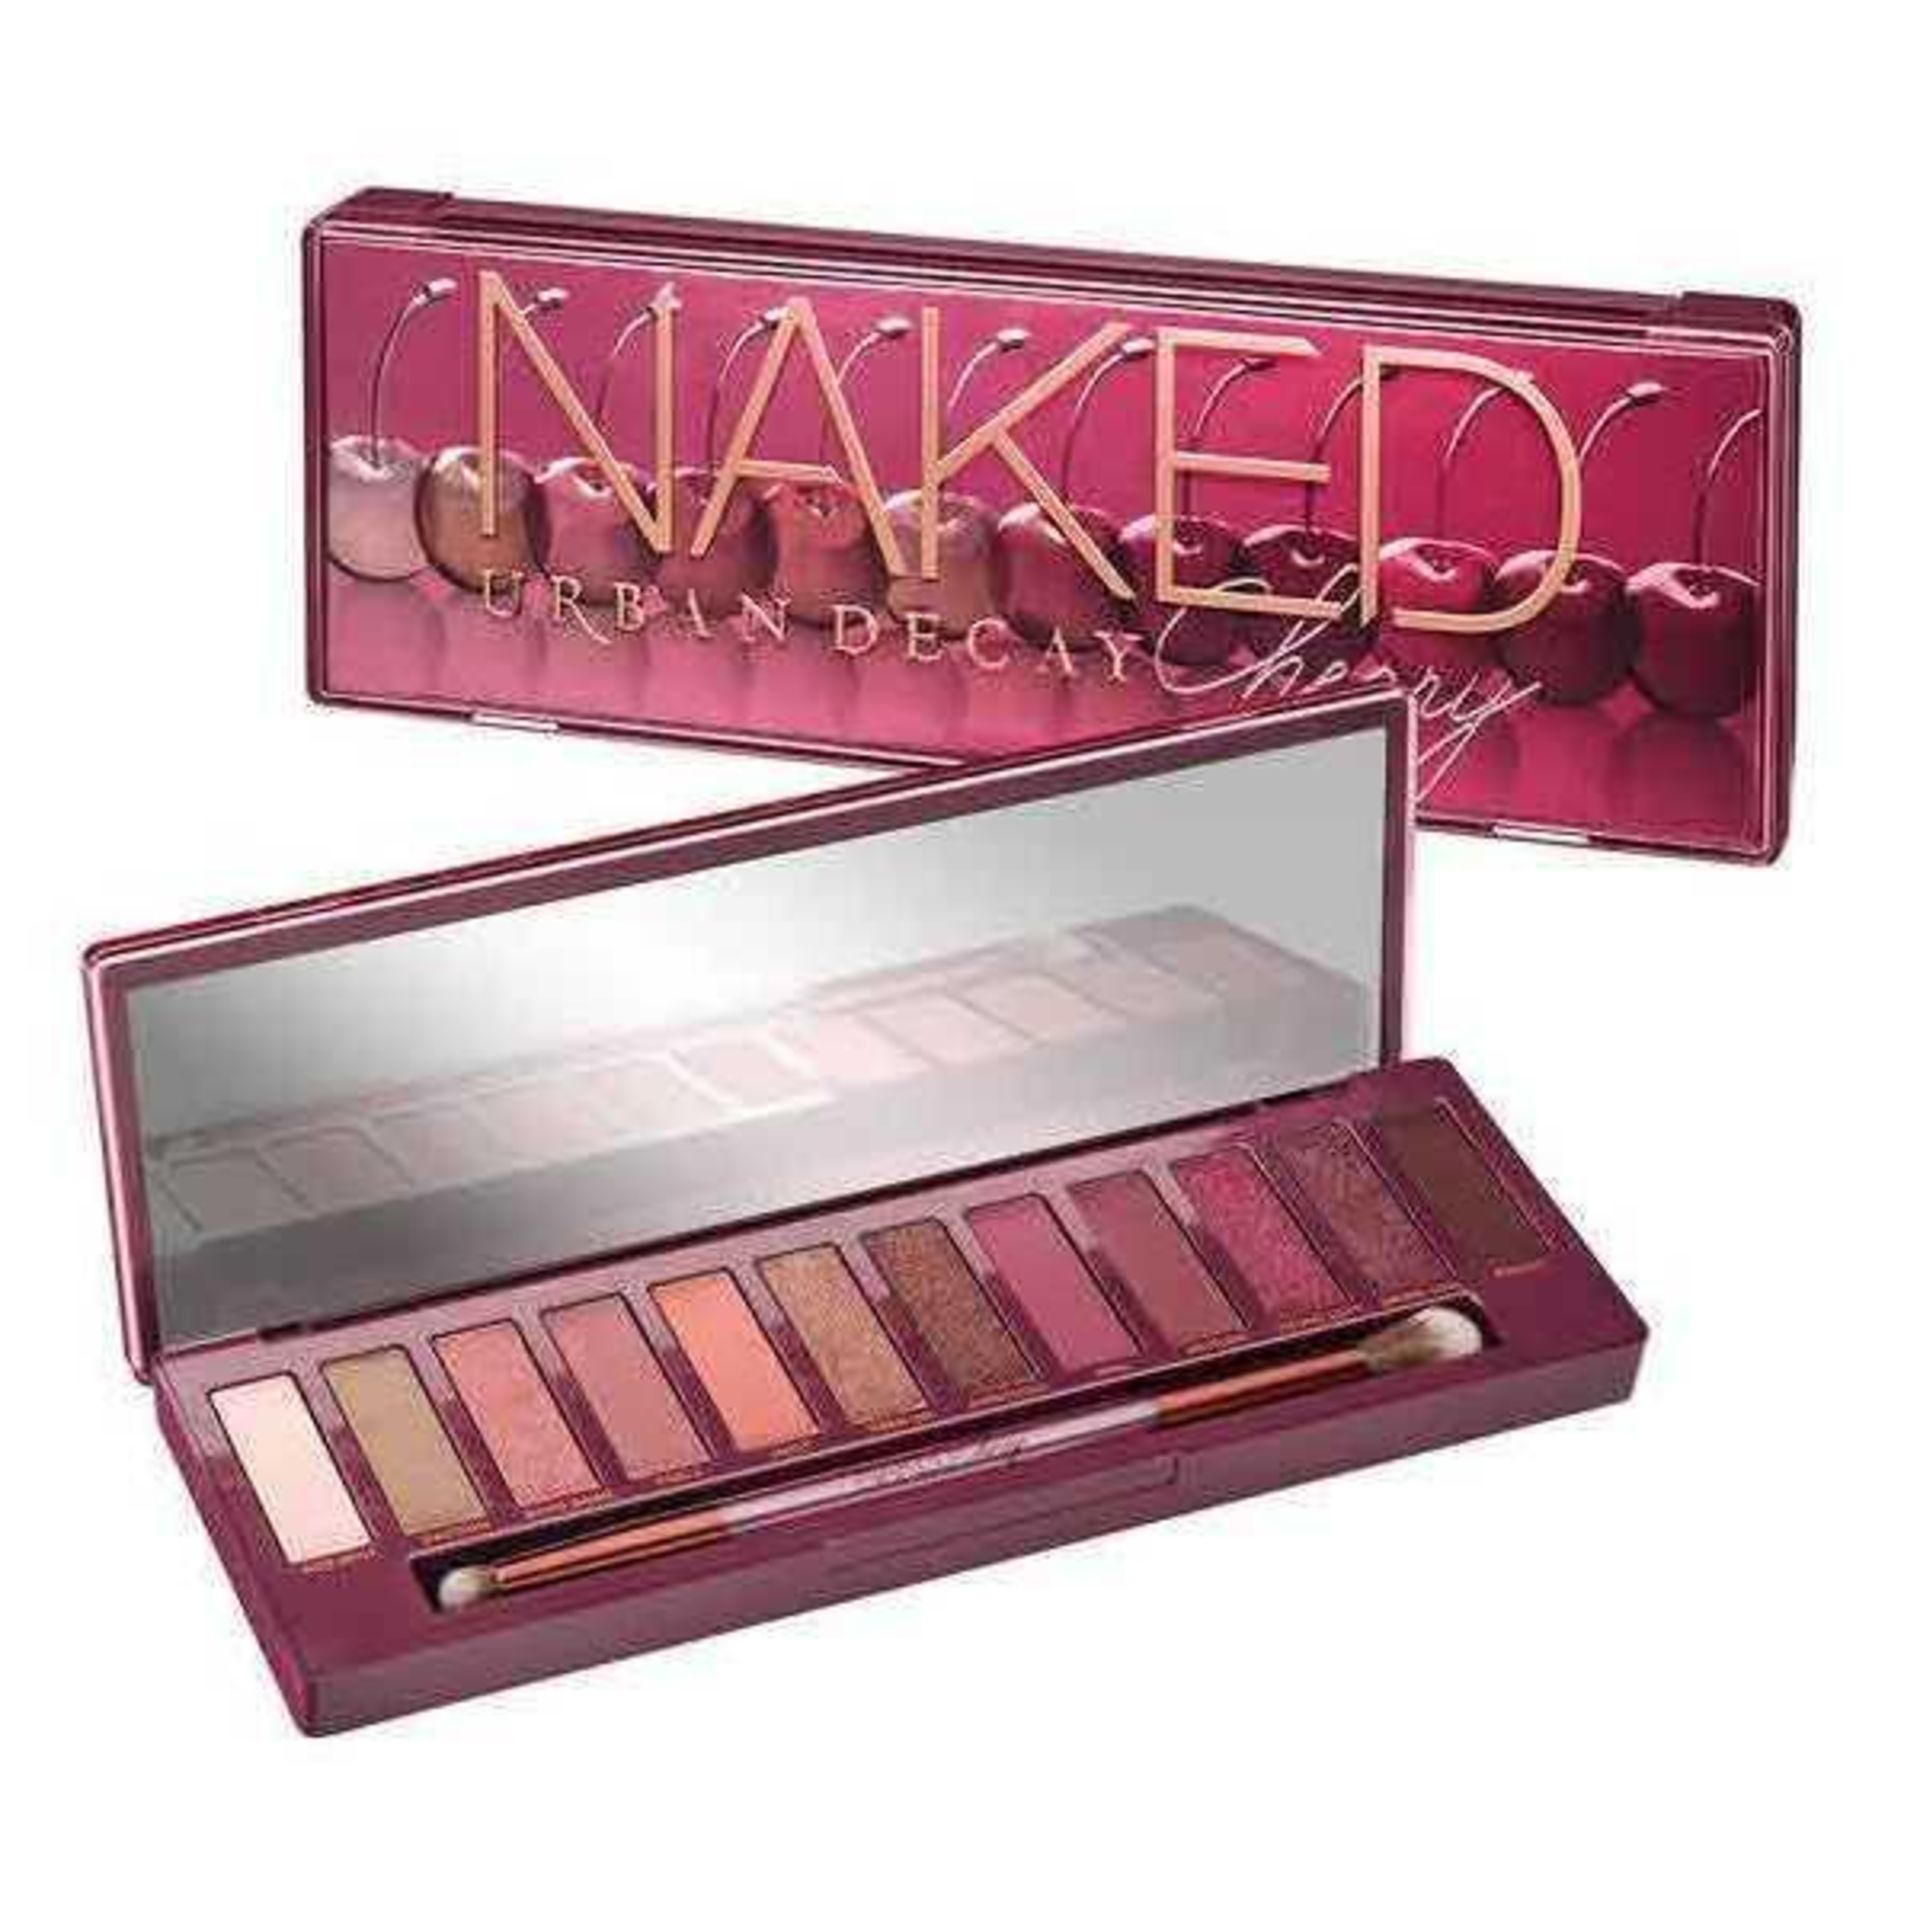 Rrp £50 Boxed Naked Urban Decay Cherry Pallete - Image 2 of 2